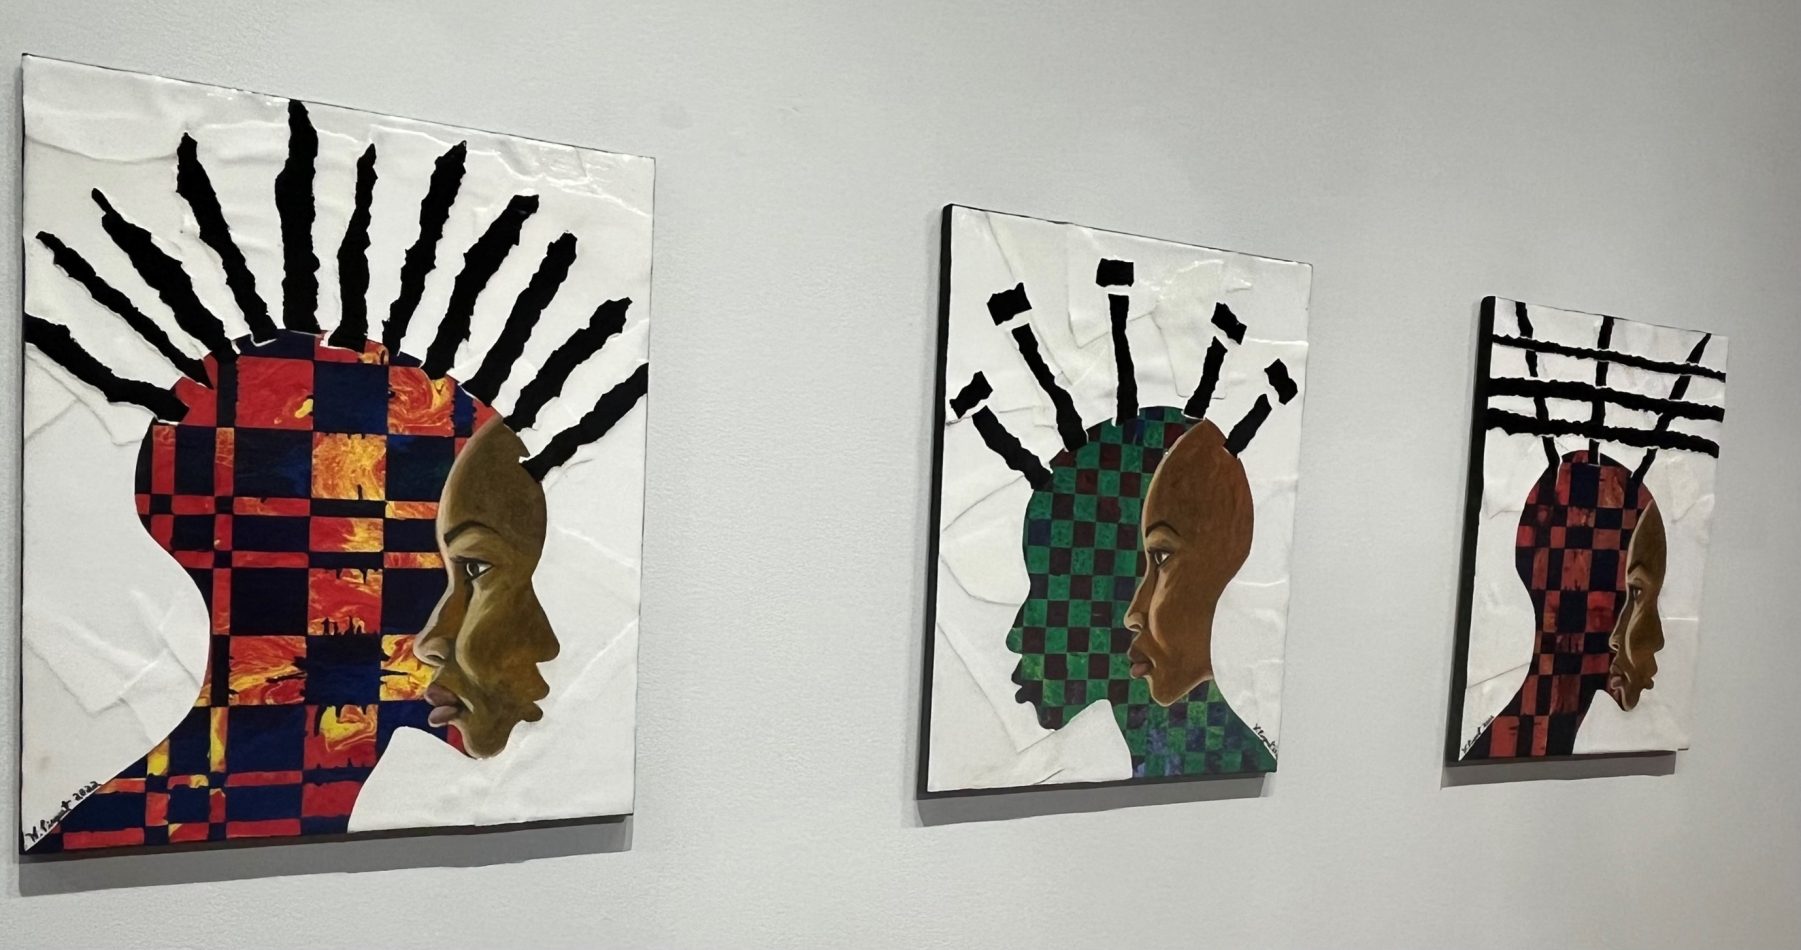 Gallery 2 - Opening Reception for Between Yesterday and Tomorrow: Perspectives from Black Contemporary Artists